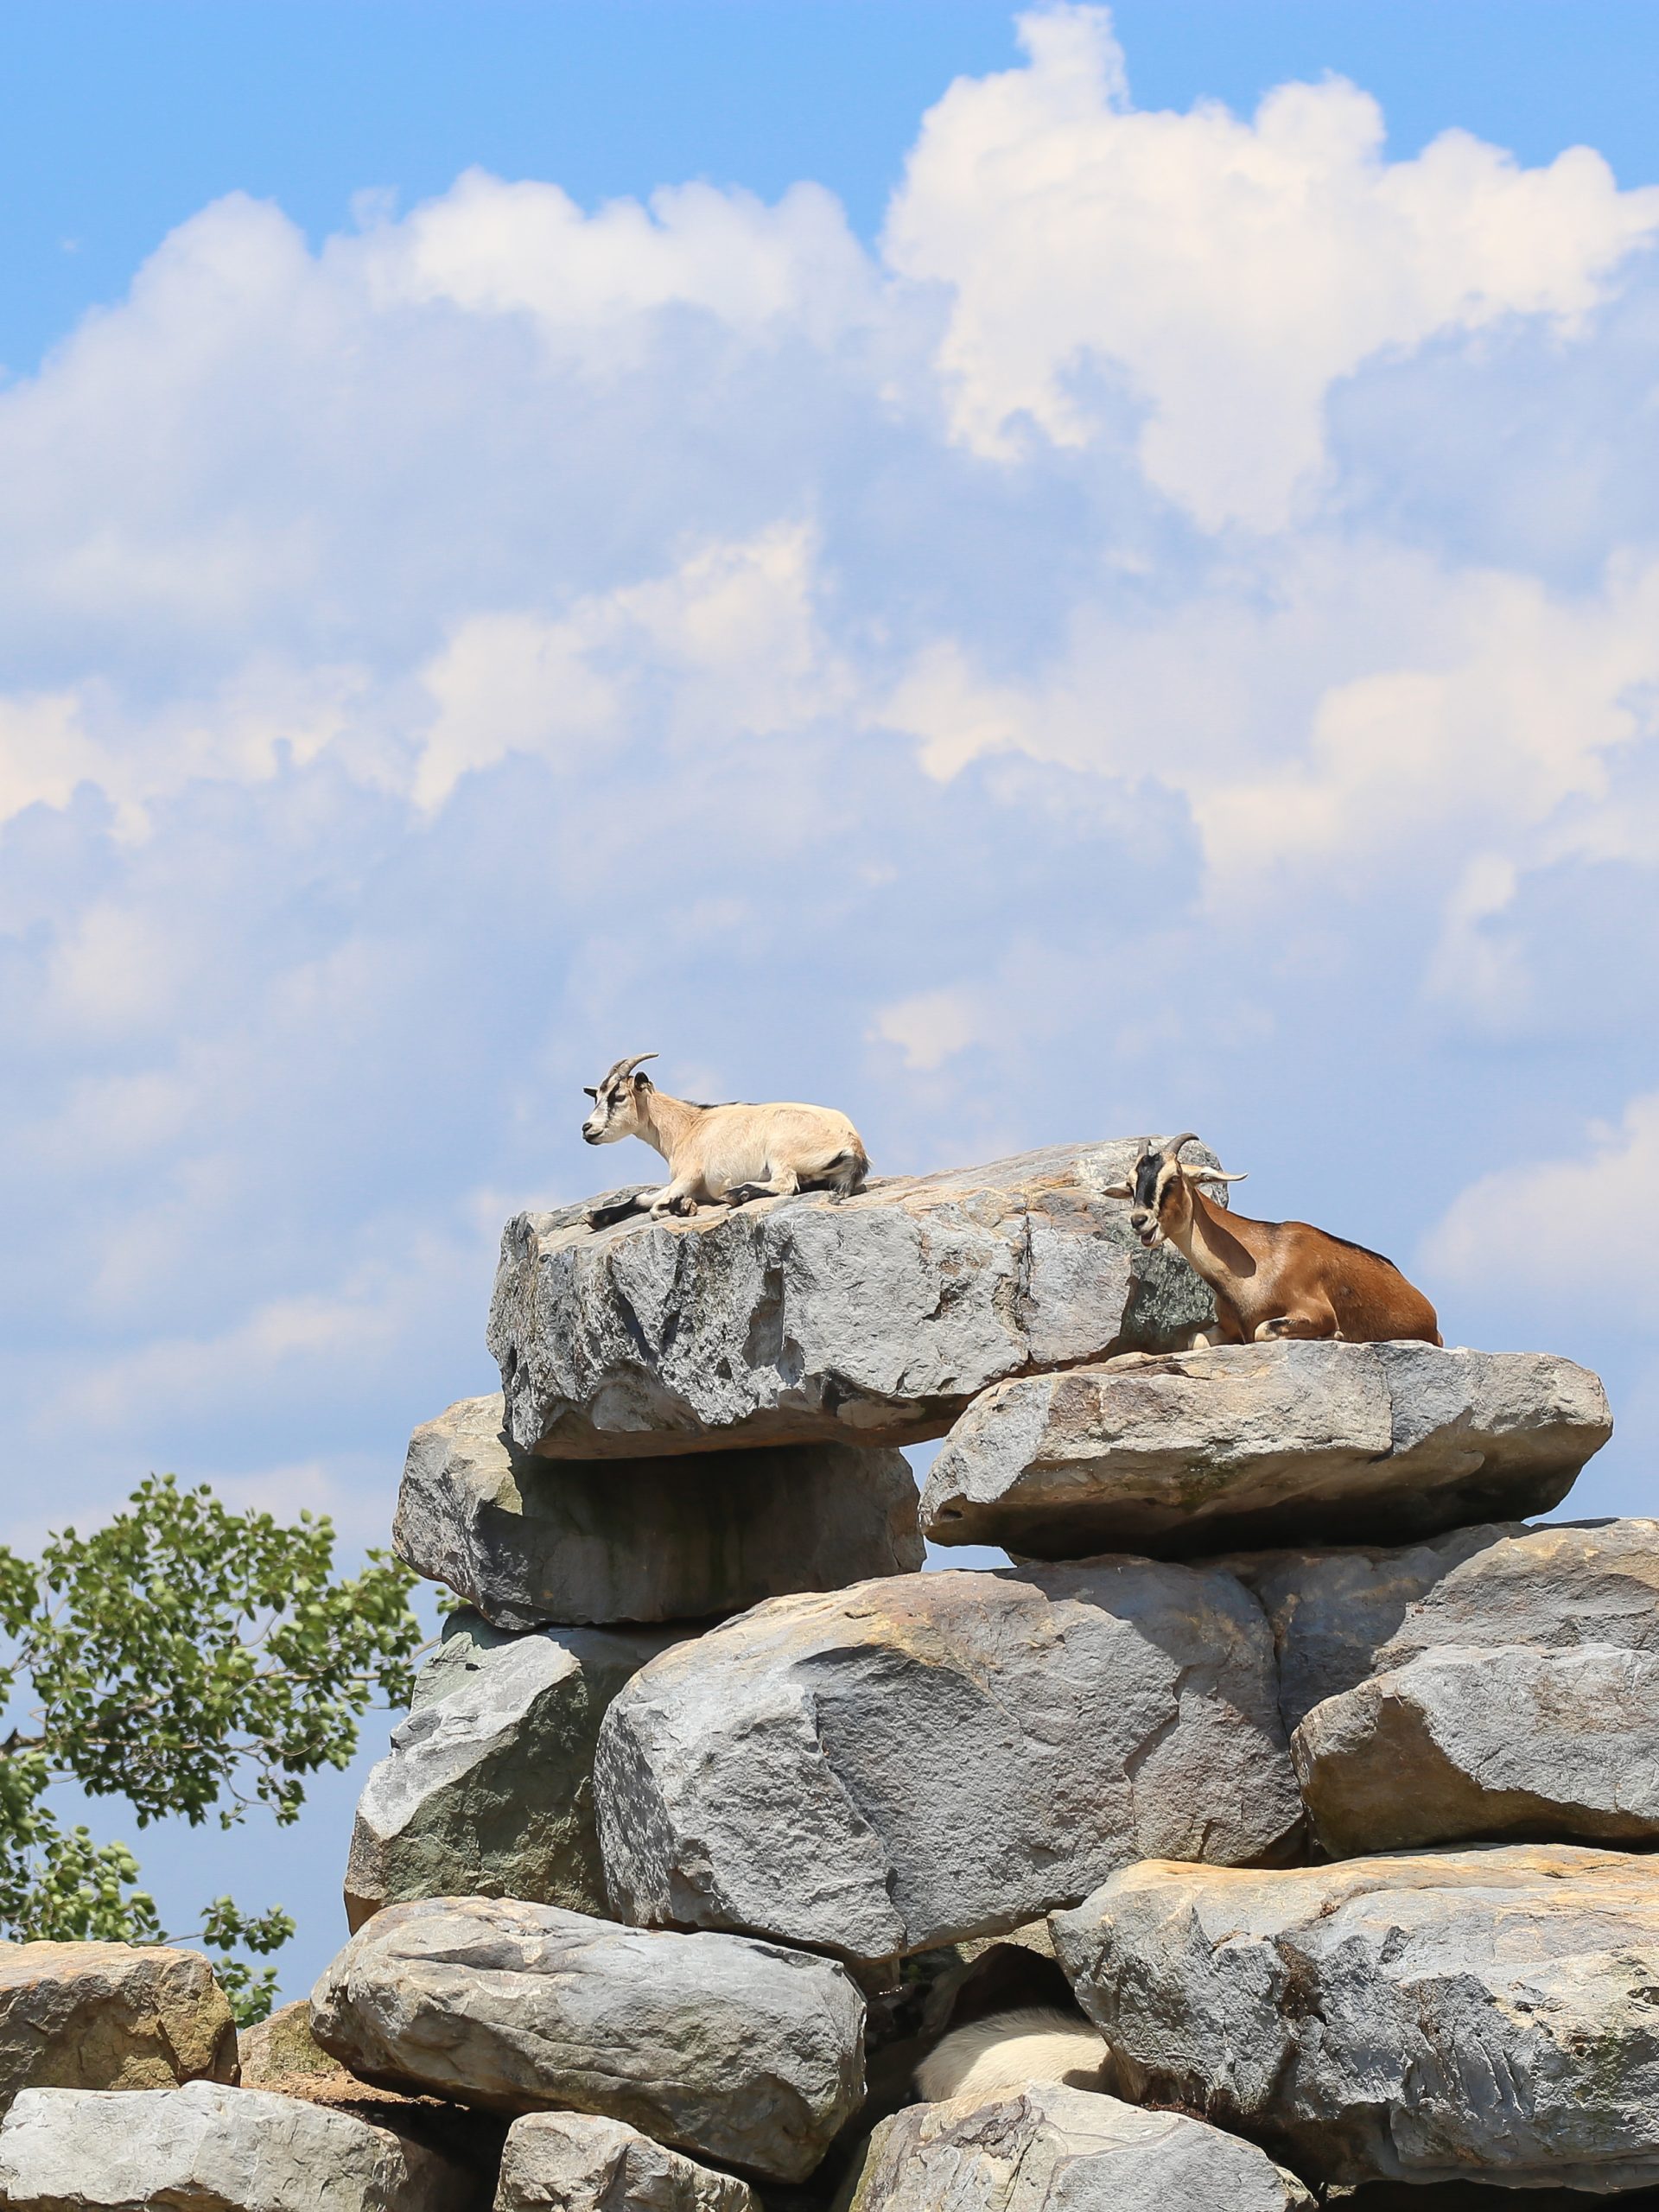 Goats perched on some rocks